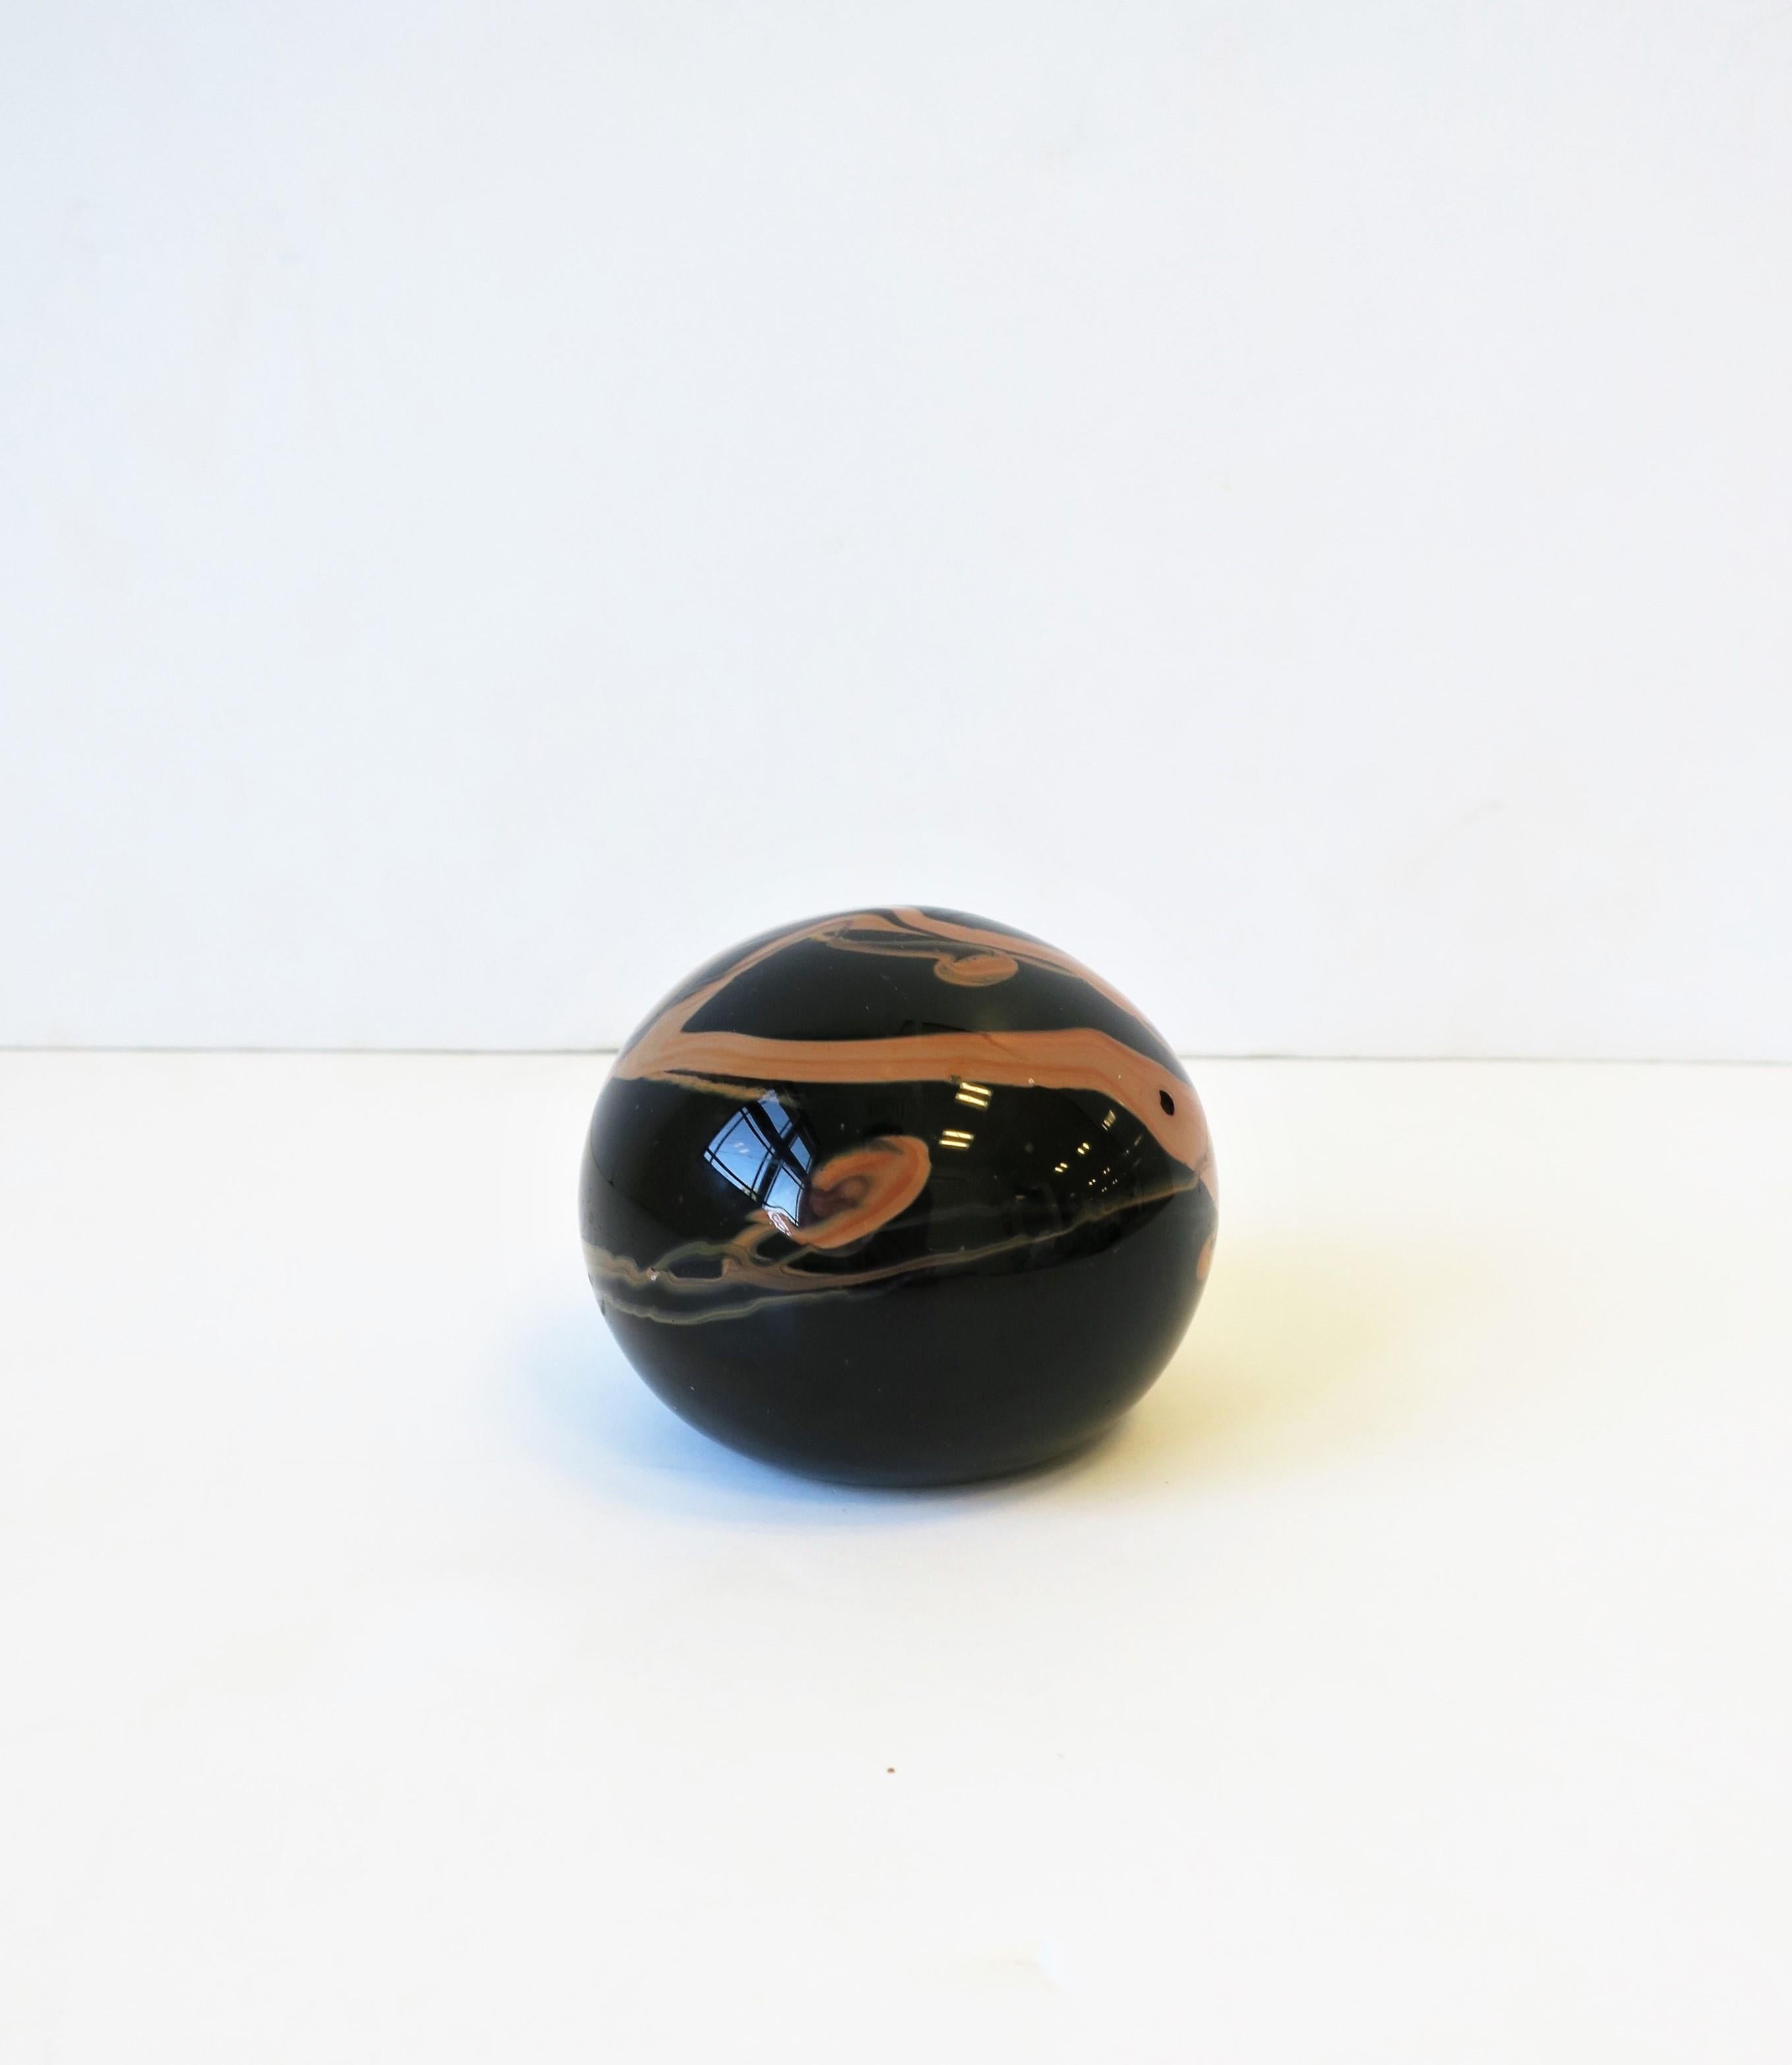 Modern Black Art Glass Paperweight or Decorative Object, circa 1970s For Sale 3